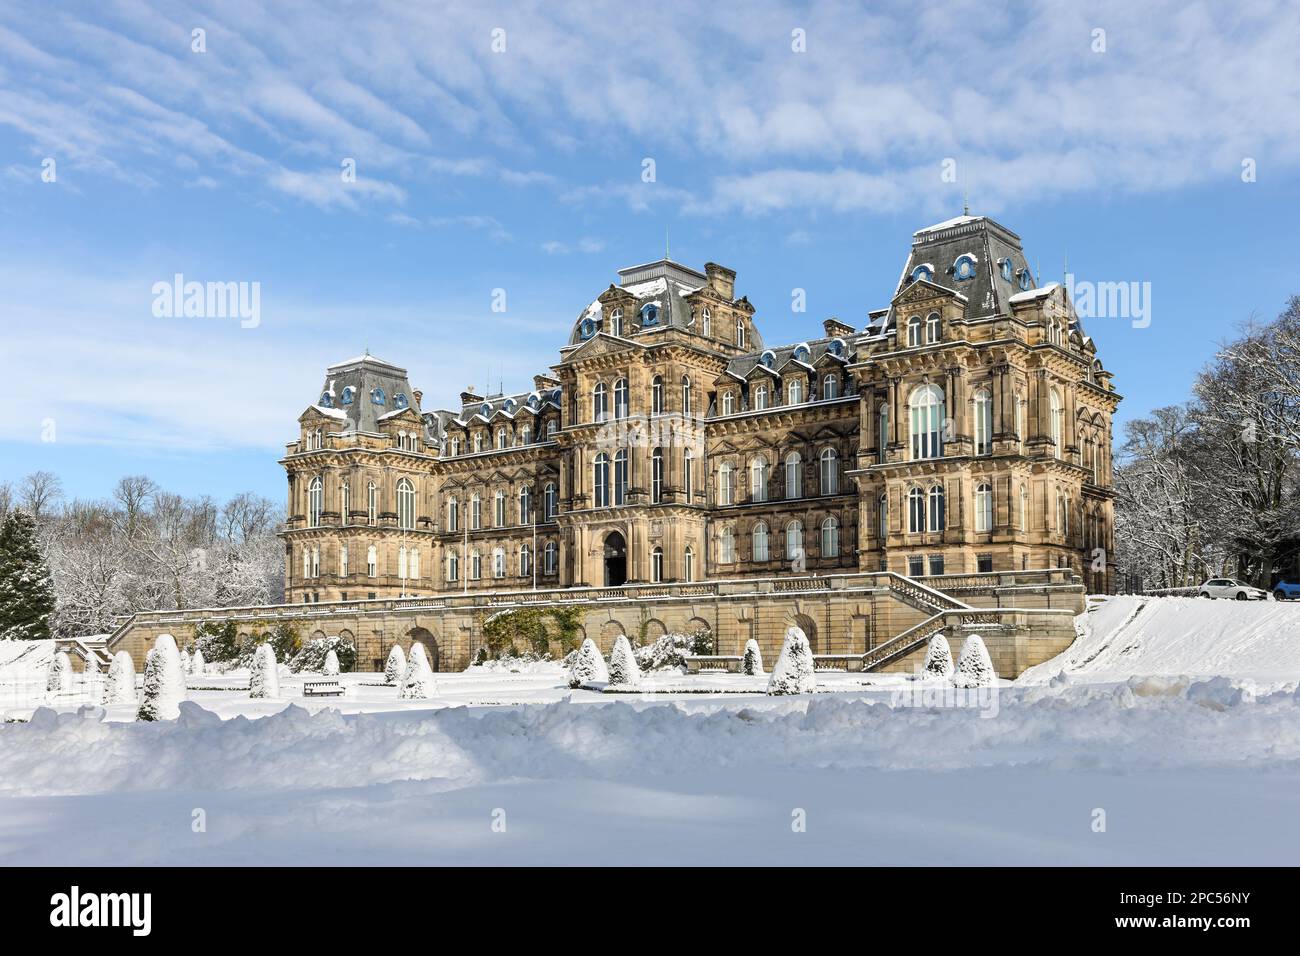 The Bowes Museum in Winter, Barnard Castle, Teesdale, County Durham, UK Stock Photo